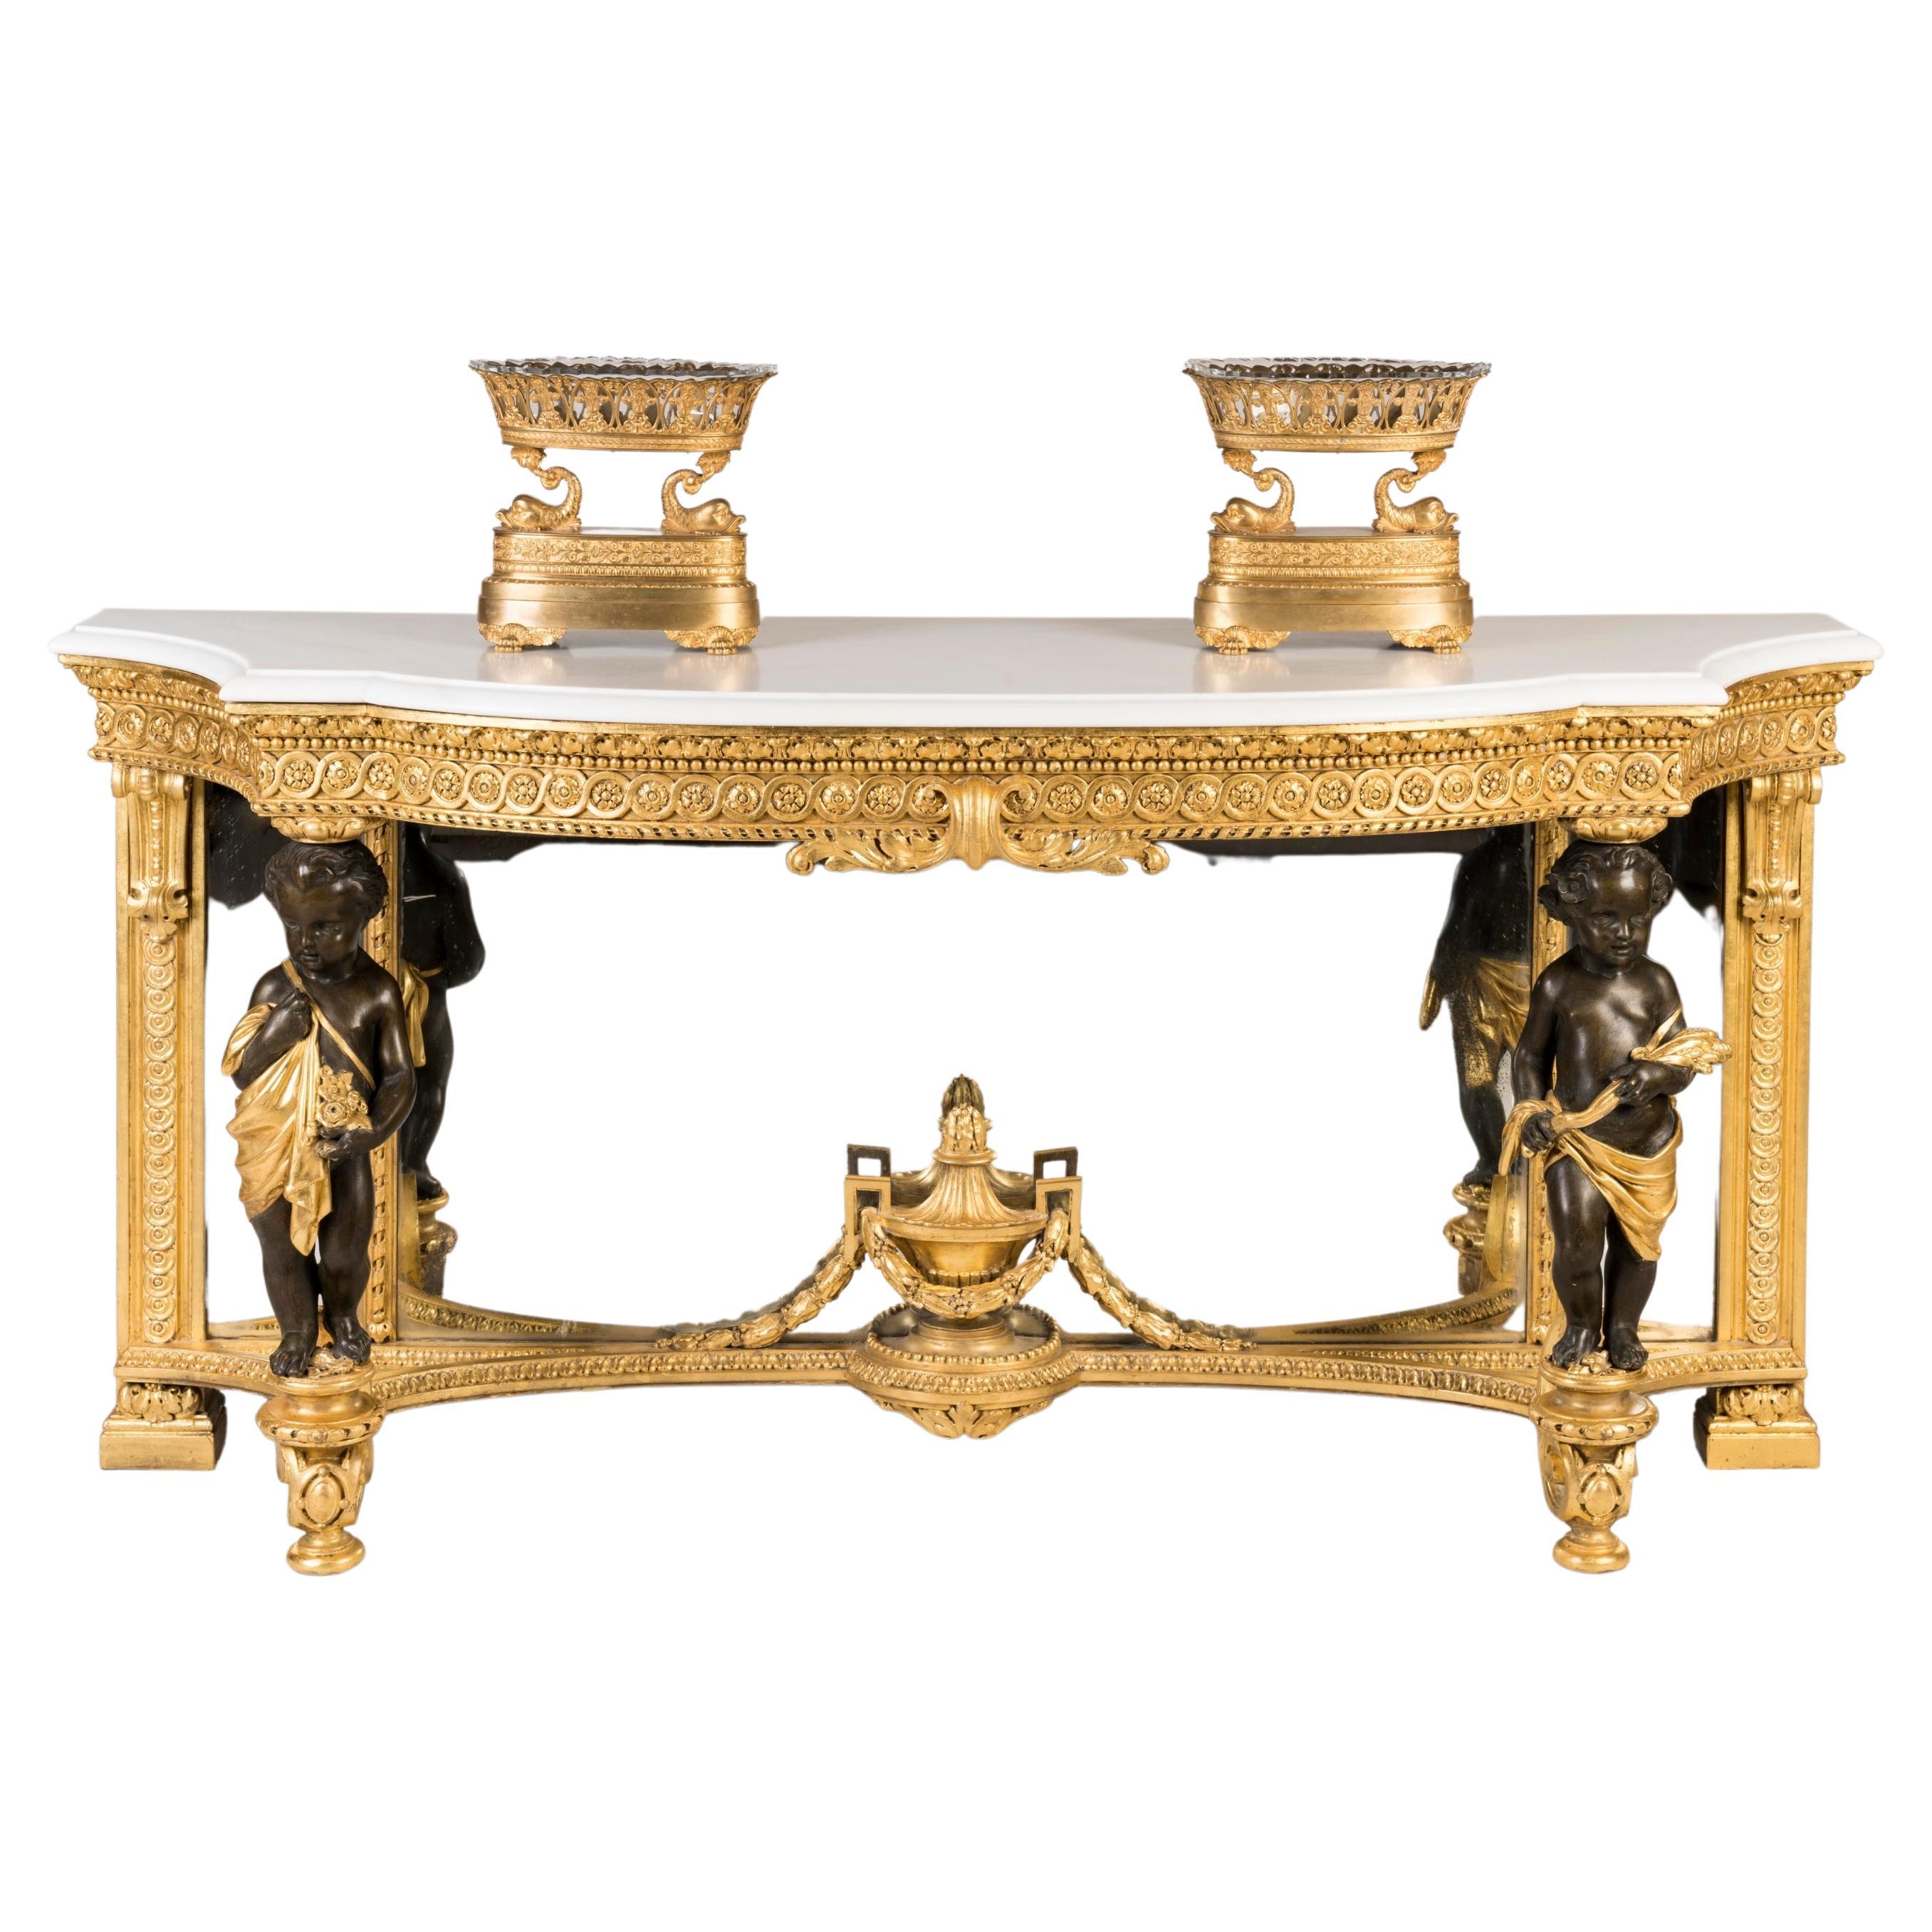 19th Century Italian Giltwood Console Table with Cherubs and Marble Top For Sale